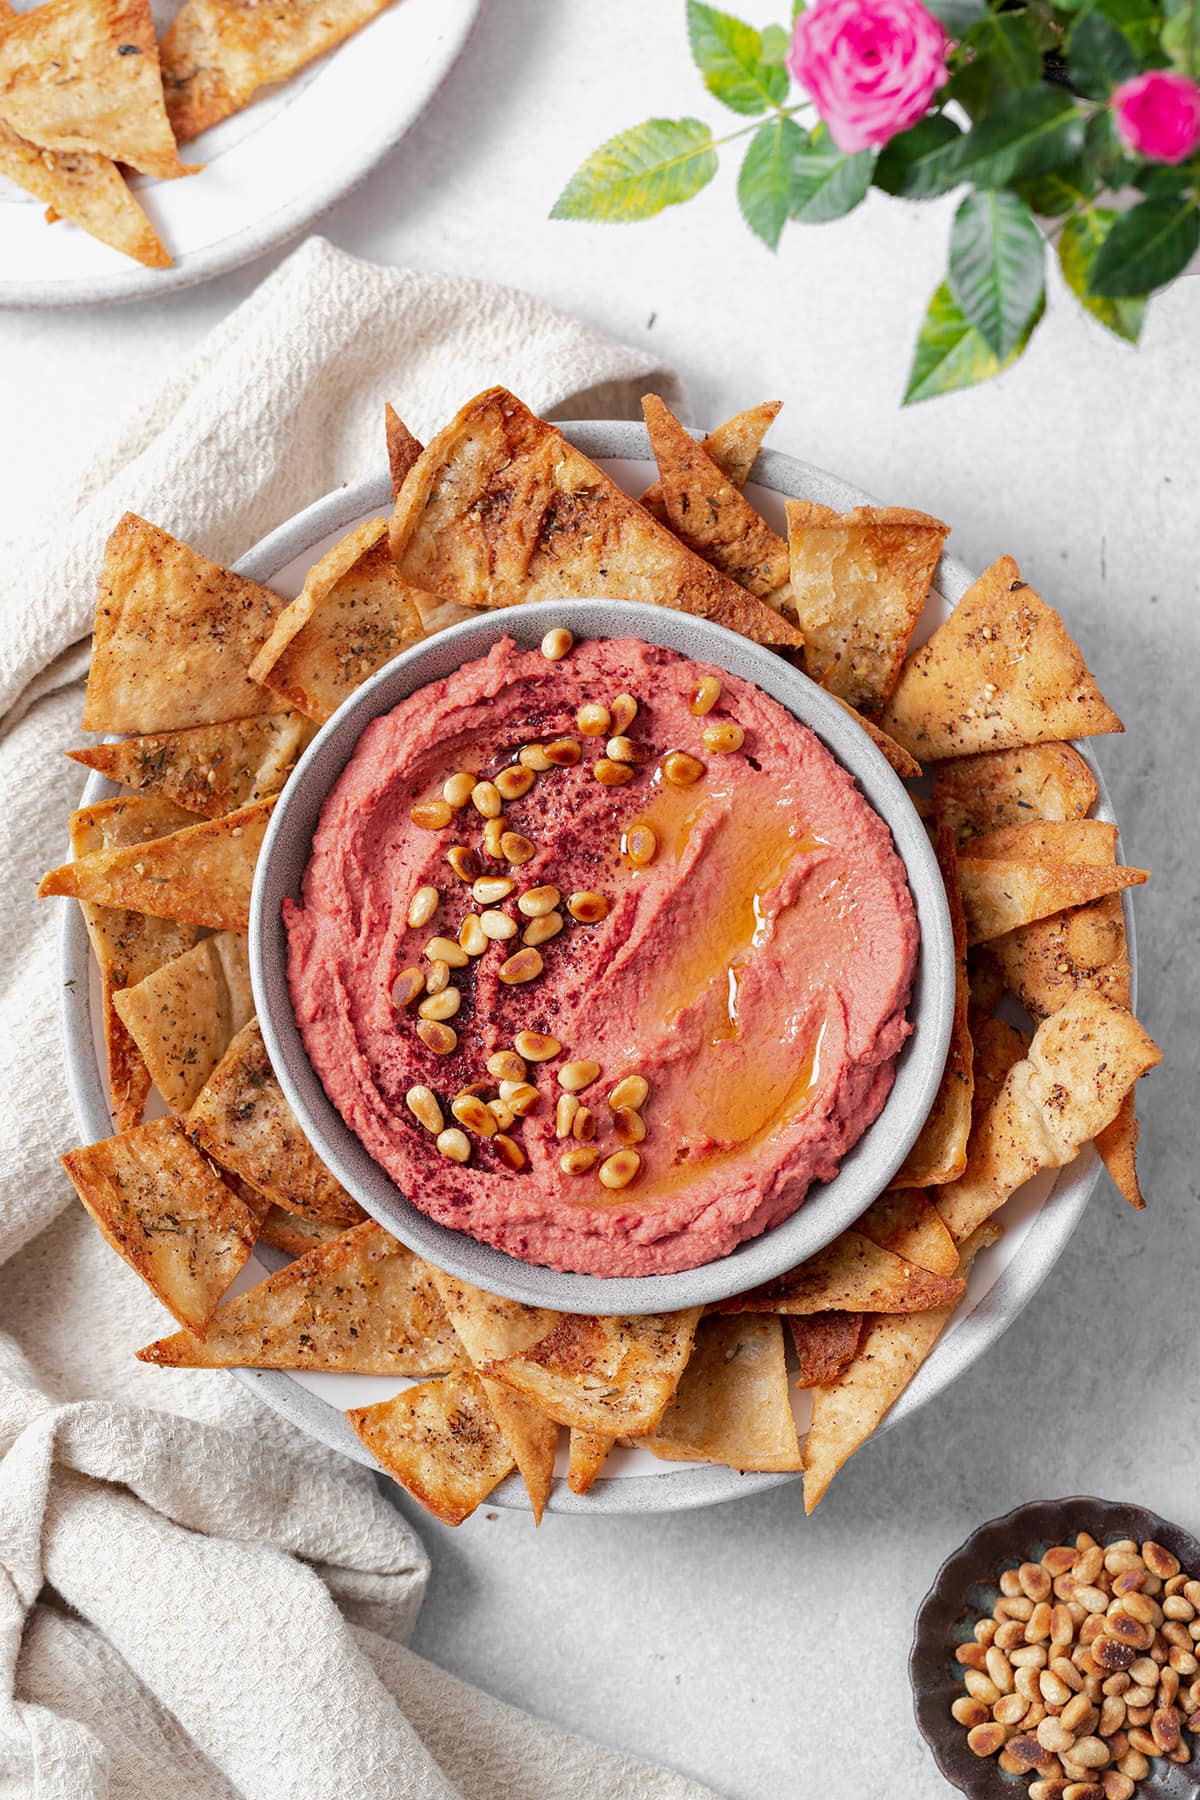 Beet hummus shown in a grey bowl on a grey plate surrounded by homemade pita chips. Grey background with a beige tea towel on the left of the bowl. One pita chip dipped in the hummus on the right side. More chips on a plate in the top left corner, a rose in the top right corner, and pine nuts in the bottom right corner.